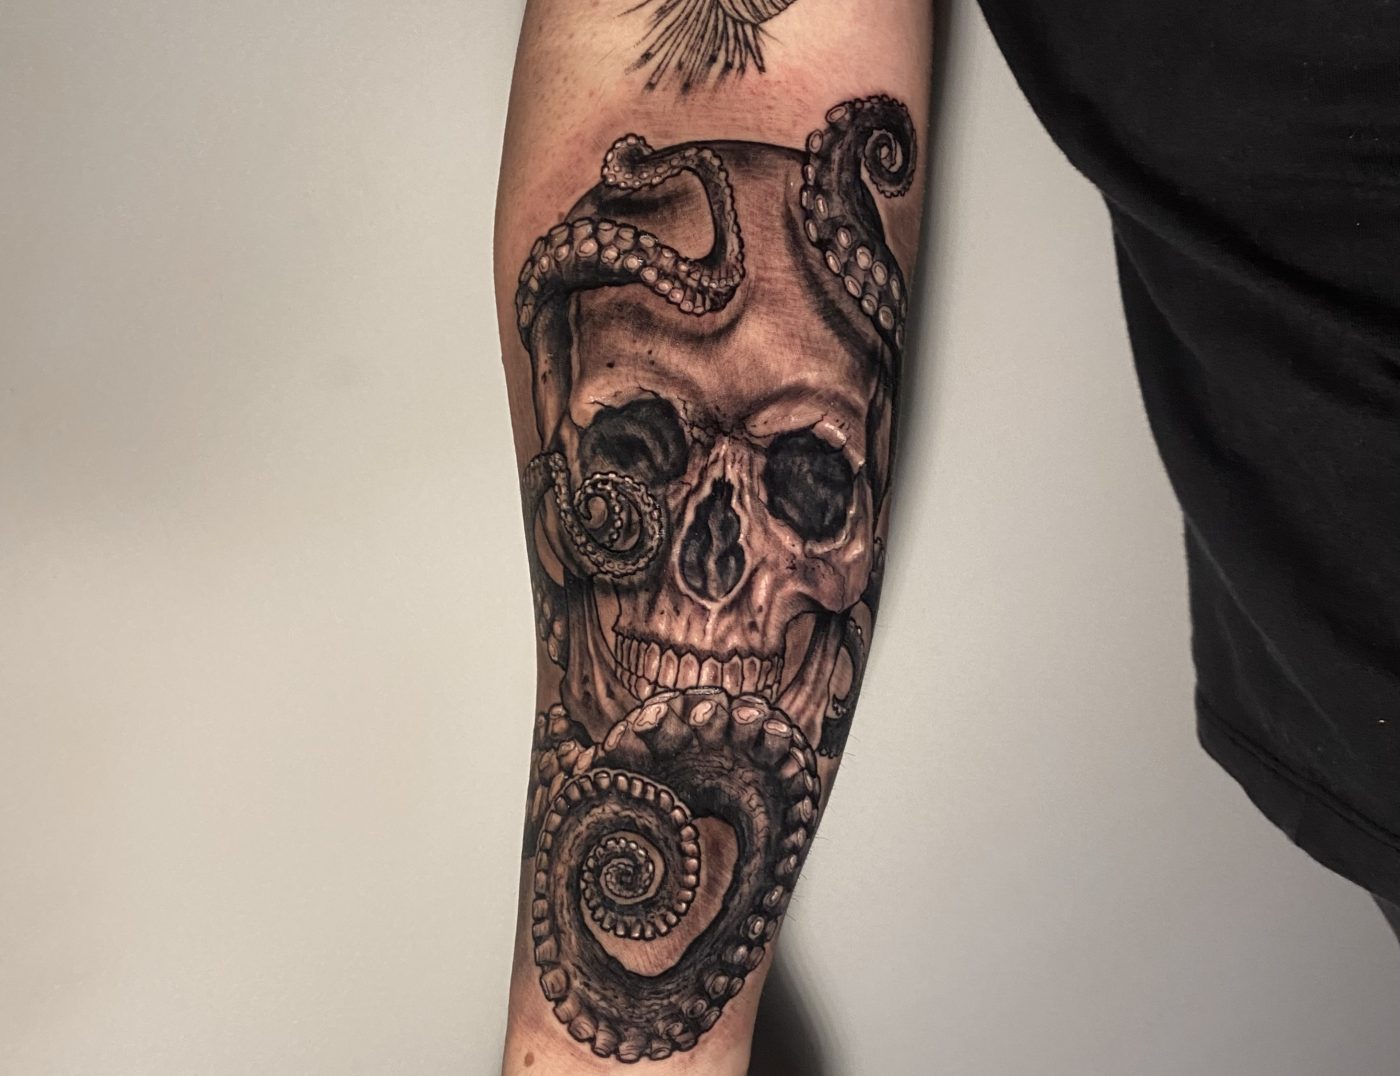 Skull And Octopus Surrealism Blackwork Tattoo By Rene Cristobal At Iron Palm Tattoos. Rene specializes in blackwork and black & gray tattoo but is experienced with many other styles. Call 404-973-7828 or stop by for a free consultation with Rene. Walk ins are welcome.